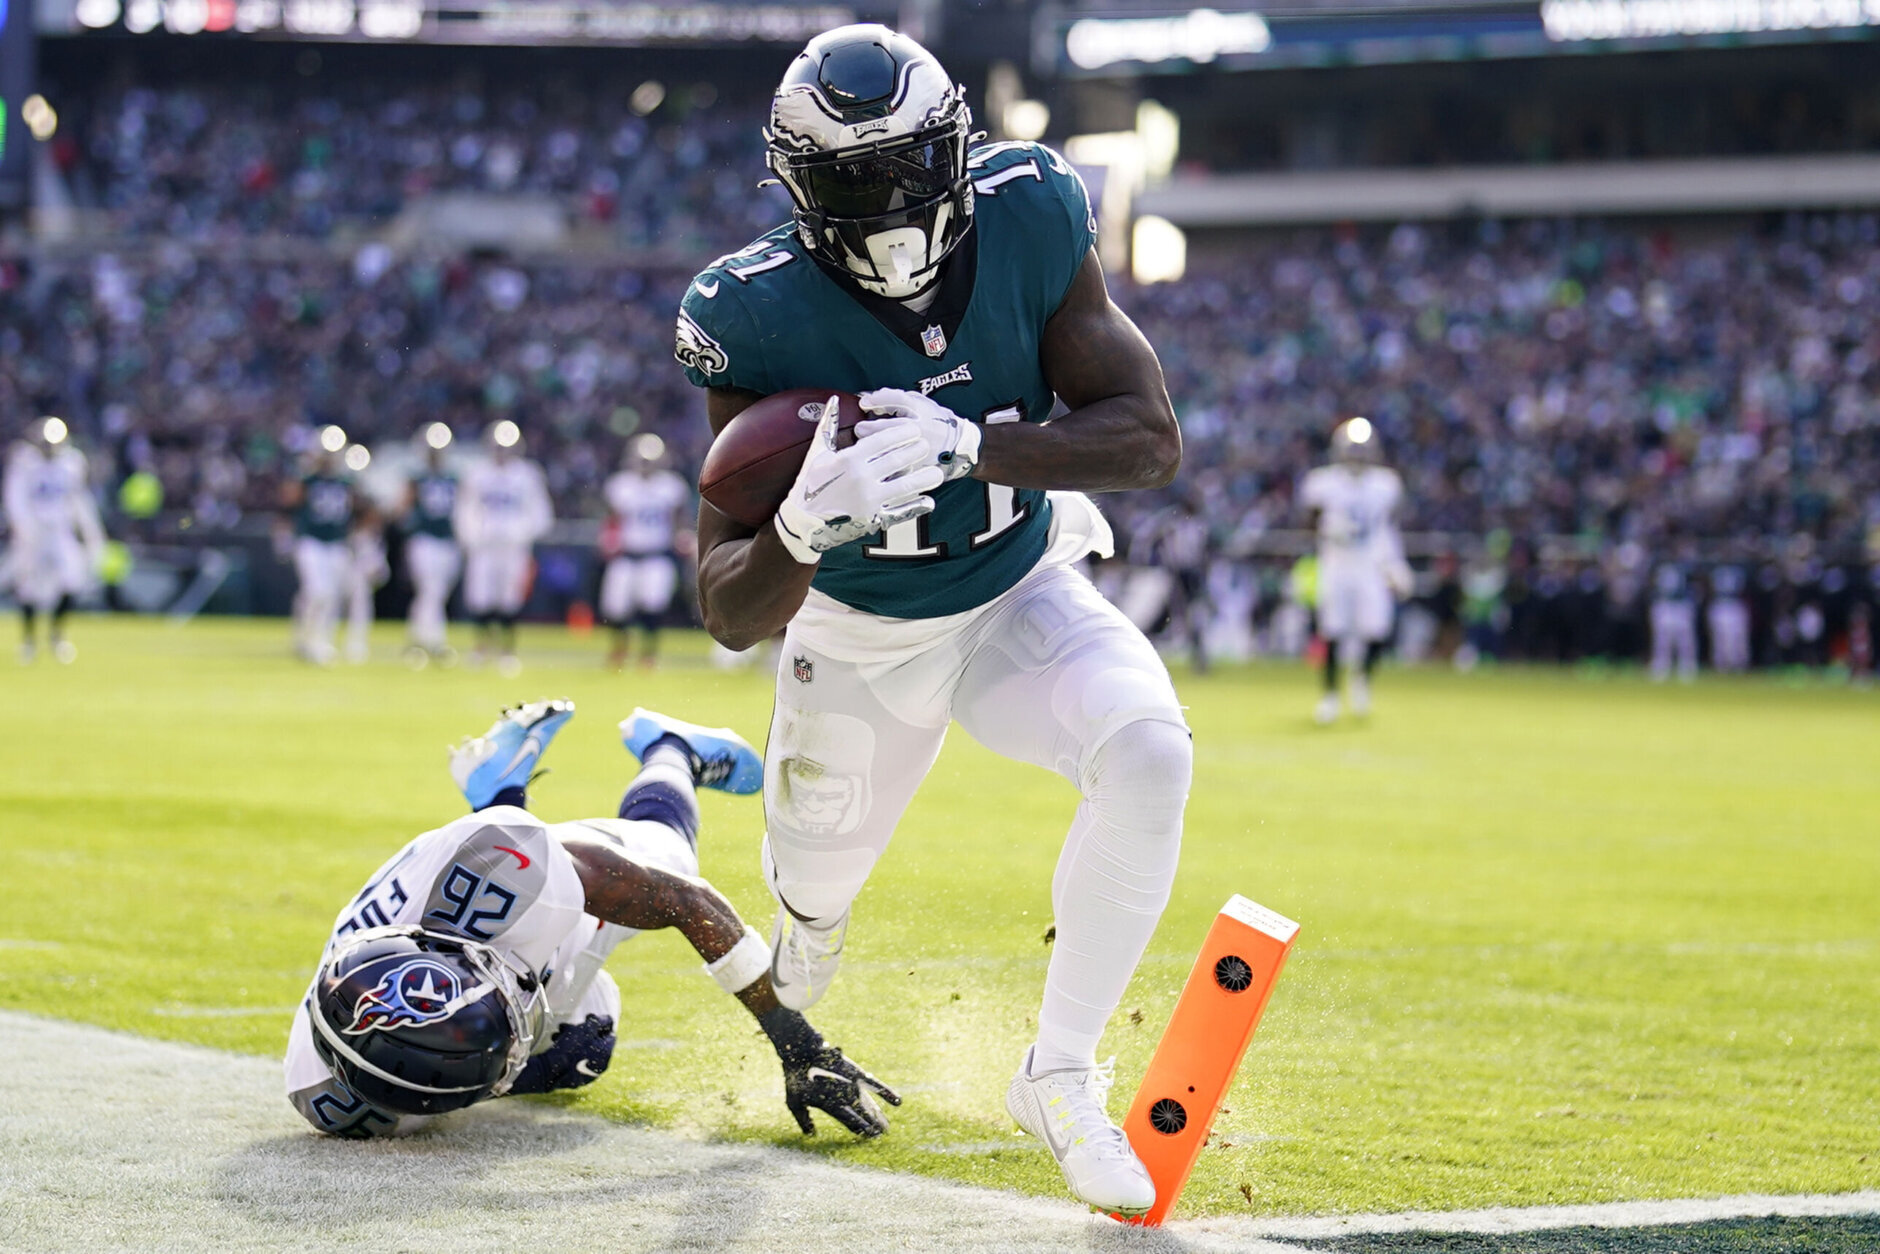 <p><b><i>Titans 10</i></b><br />
<b><i>Eagles 35</i></b></p>
<p><a href="https://www.nbcsports.com/philadelphia/eagles/eagles-aj-brown-grown-and-peace-he-faces-titans" target="_blank" rel="noopener">A.J. Brown lit up his former team</a> to help his current team <a href="https://twitter.com/ESPNStatsInfo/status/1599529082986930181?s=20&amp;t=JDeaKN4d1GXs2lGtUHWXpA" target="_blank" rel="noopener">make a historic statement</a>: Philly&#8217;s balance is the stuff Super Bowl teams are made of. The Eagles are scary good and the Titans — now 1-5 against teams .500 or better — are pretenders thriving in a lousy division.</p>
